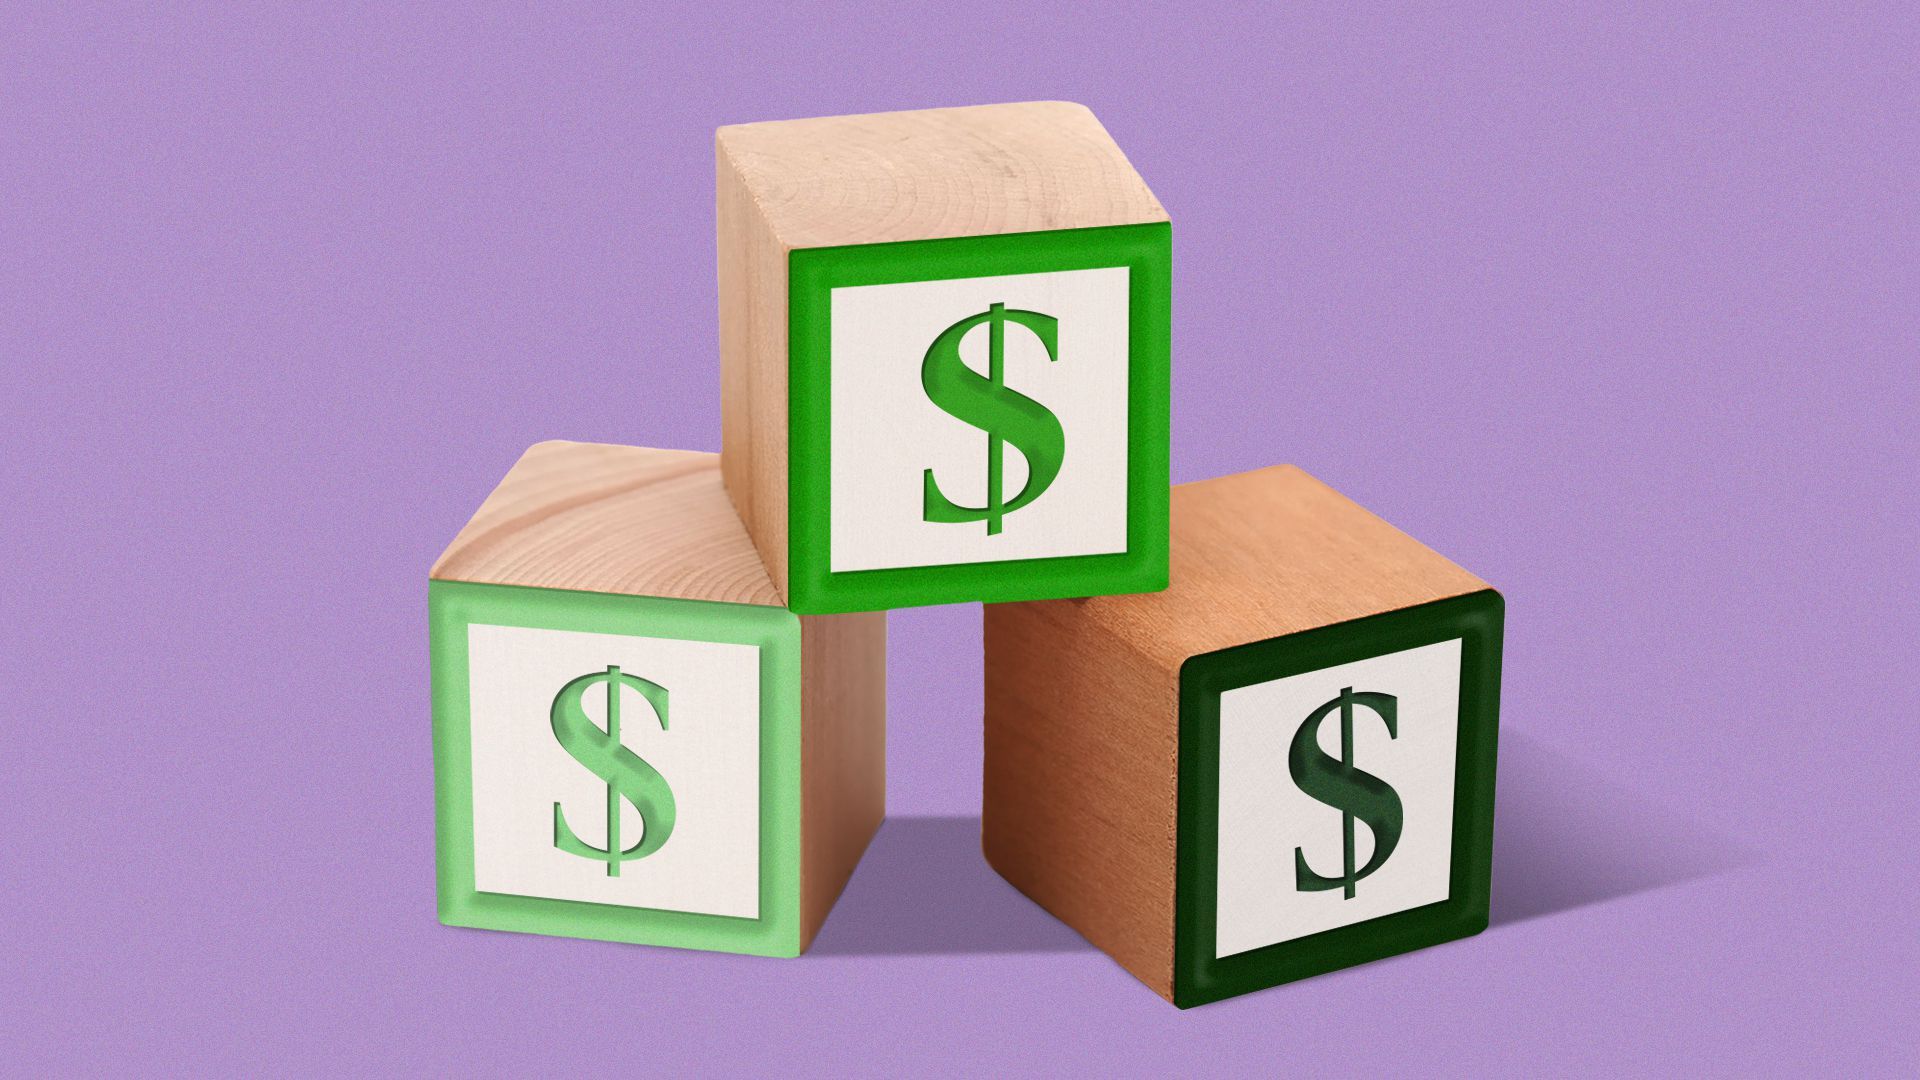 Illustration of alphabet blocks with dollar signs instead of letters.